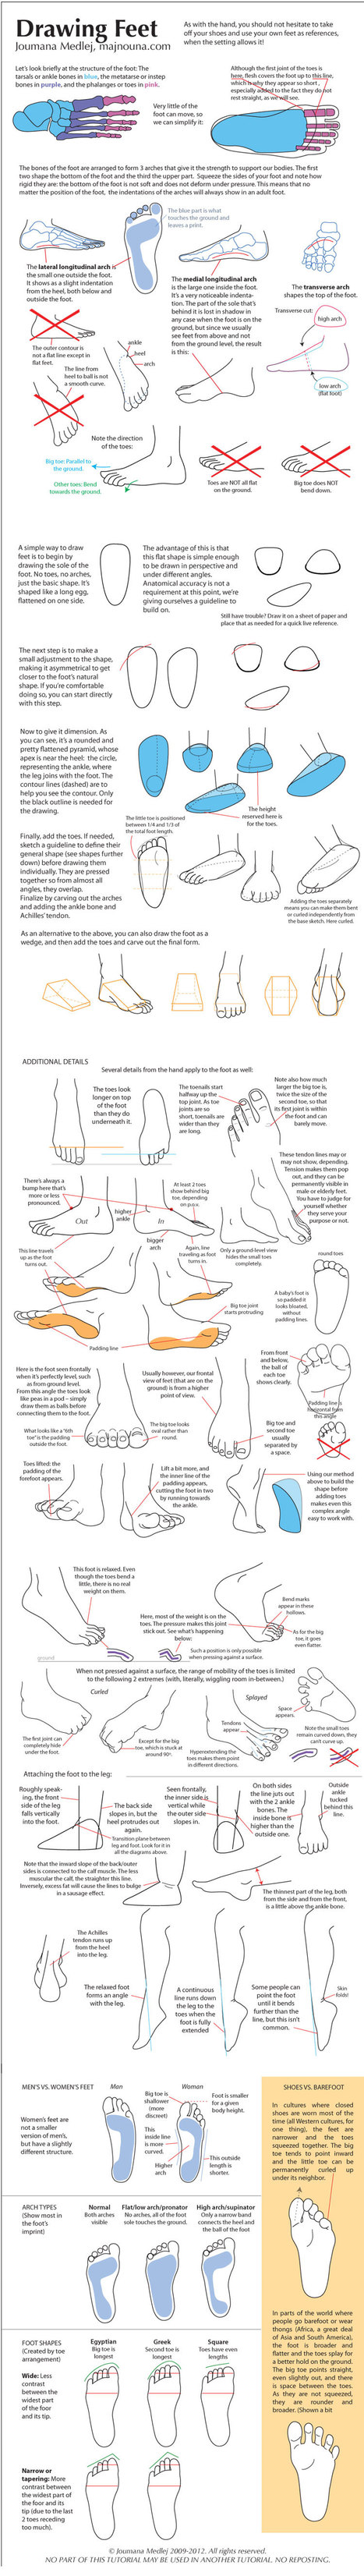 Drawing Feet: One Step at a Time | Drawing References and Resources | Scoop.it